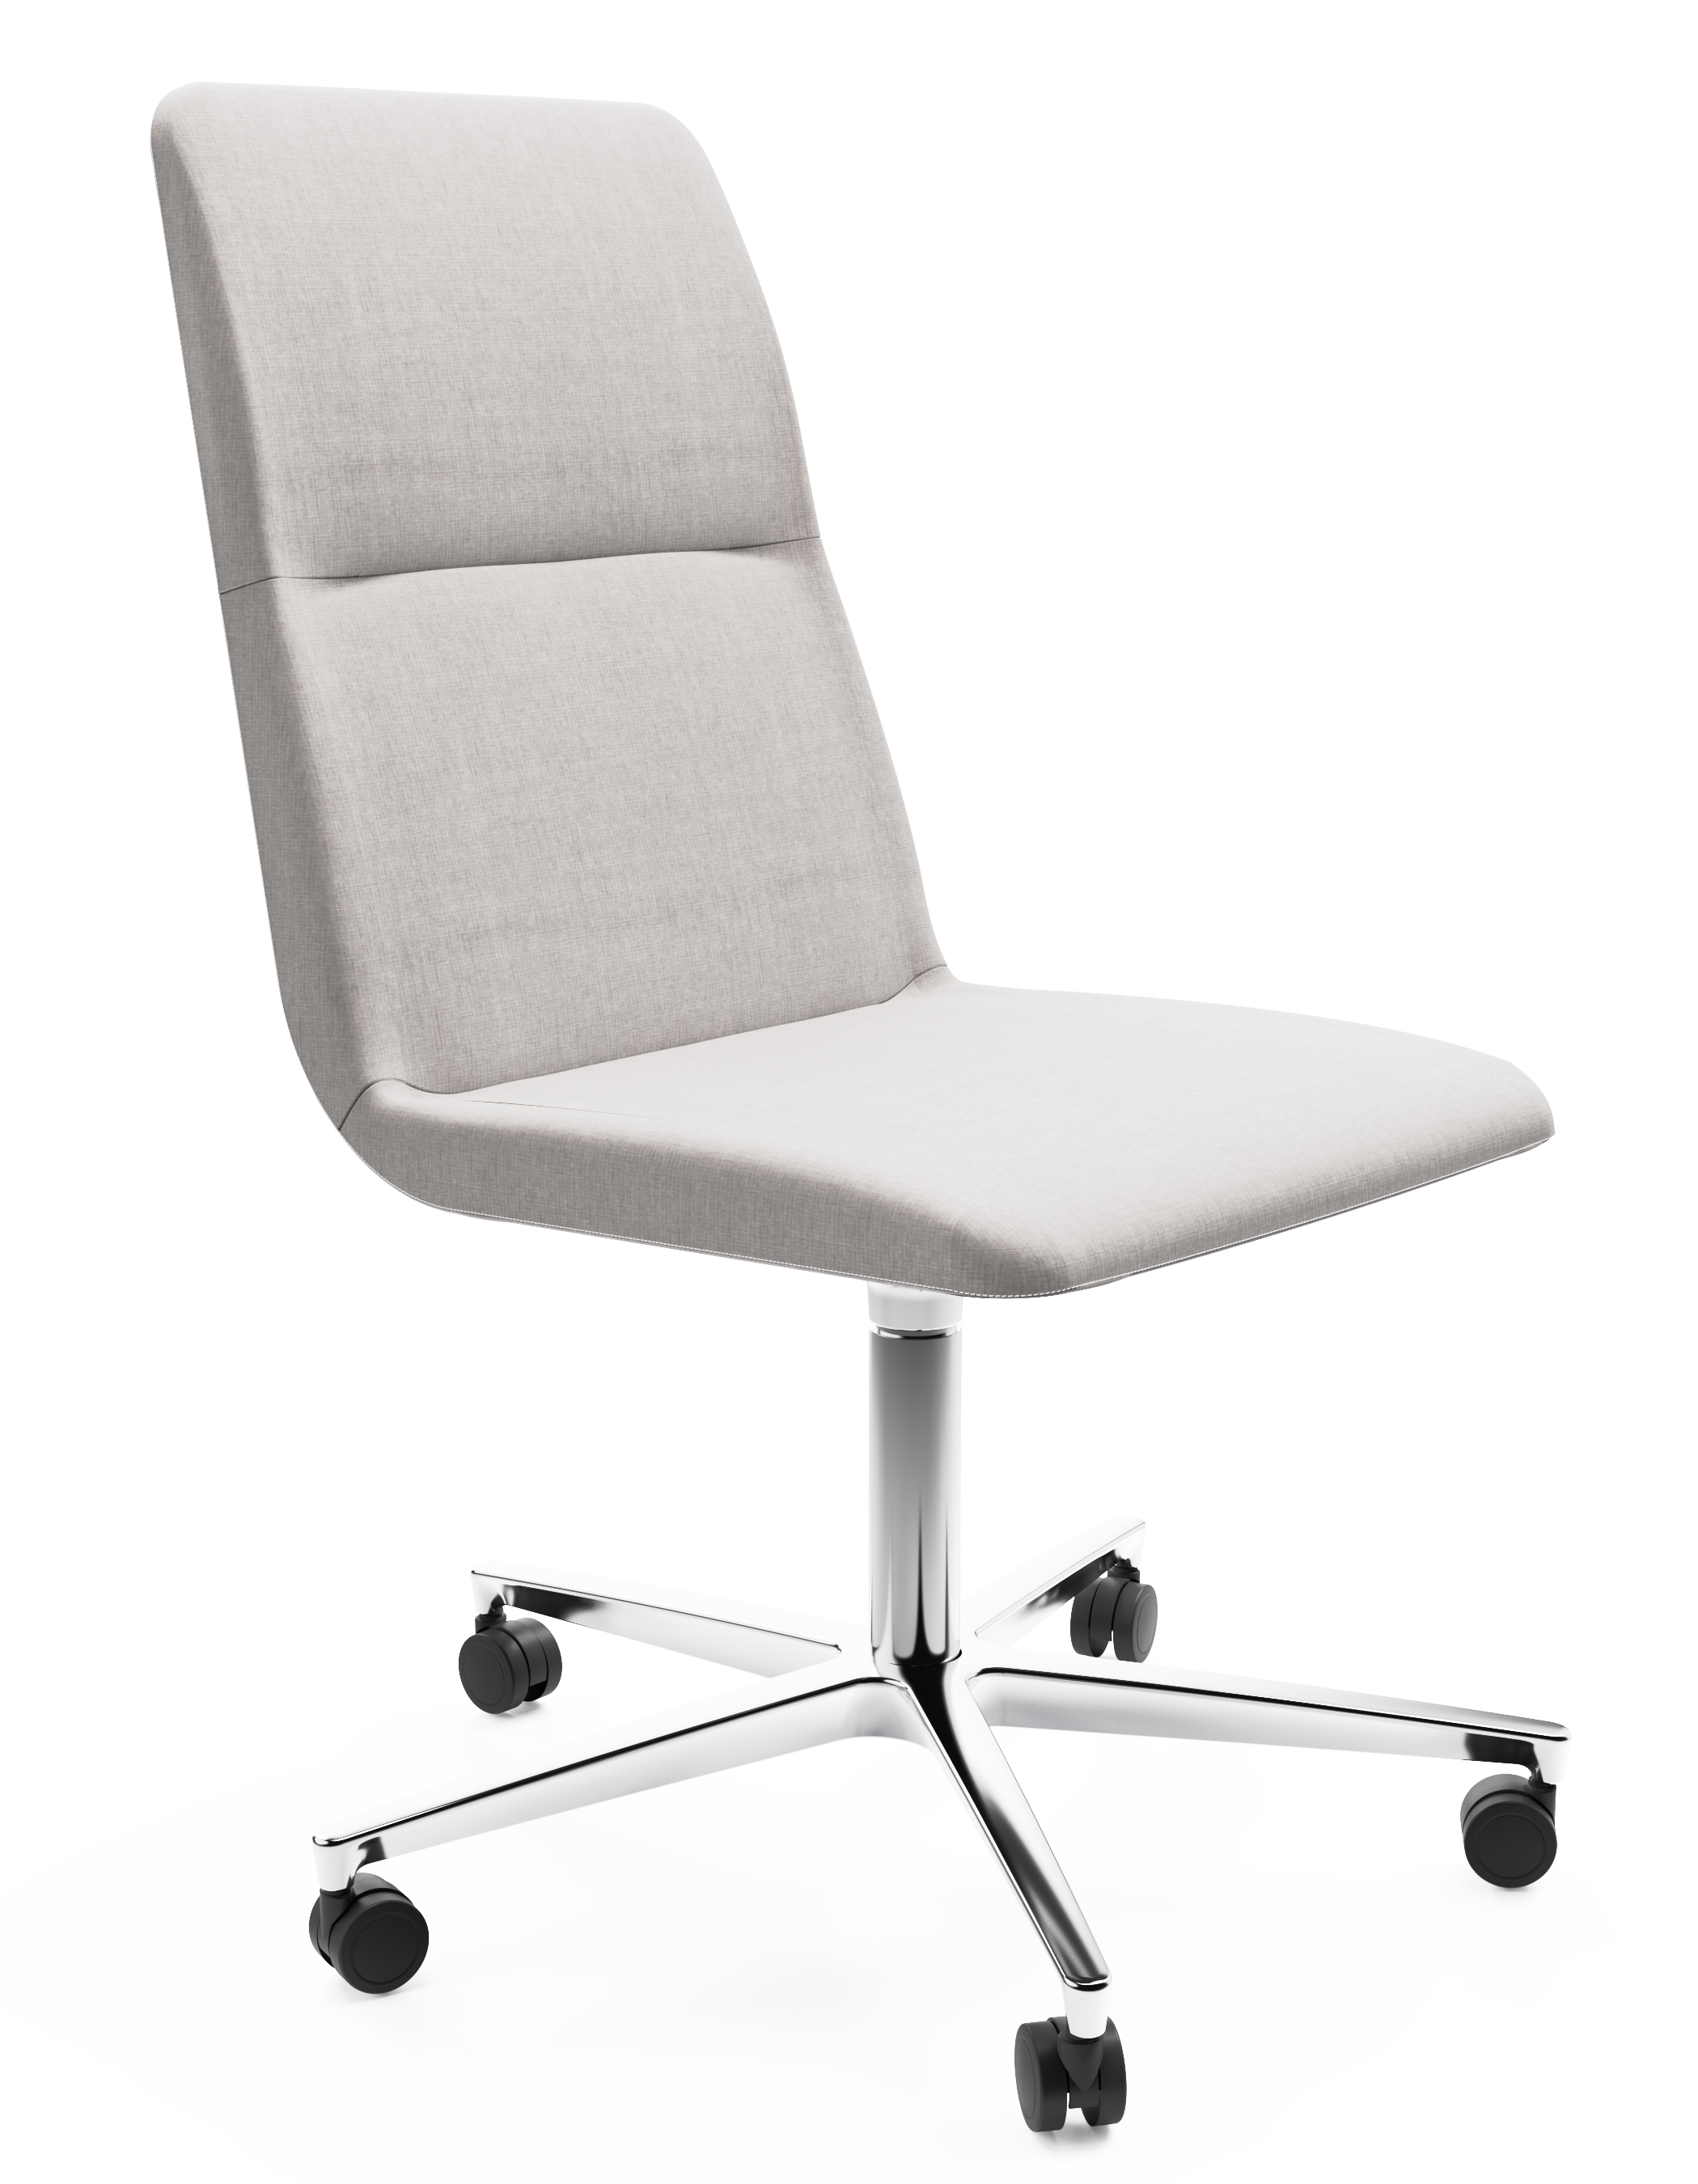 WS - Accord 5 star base chair - chrome - remix 126 - front angle